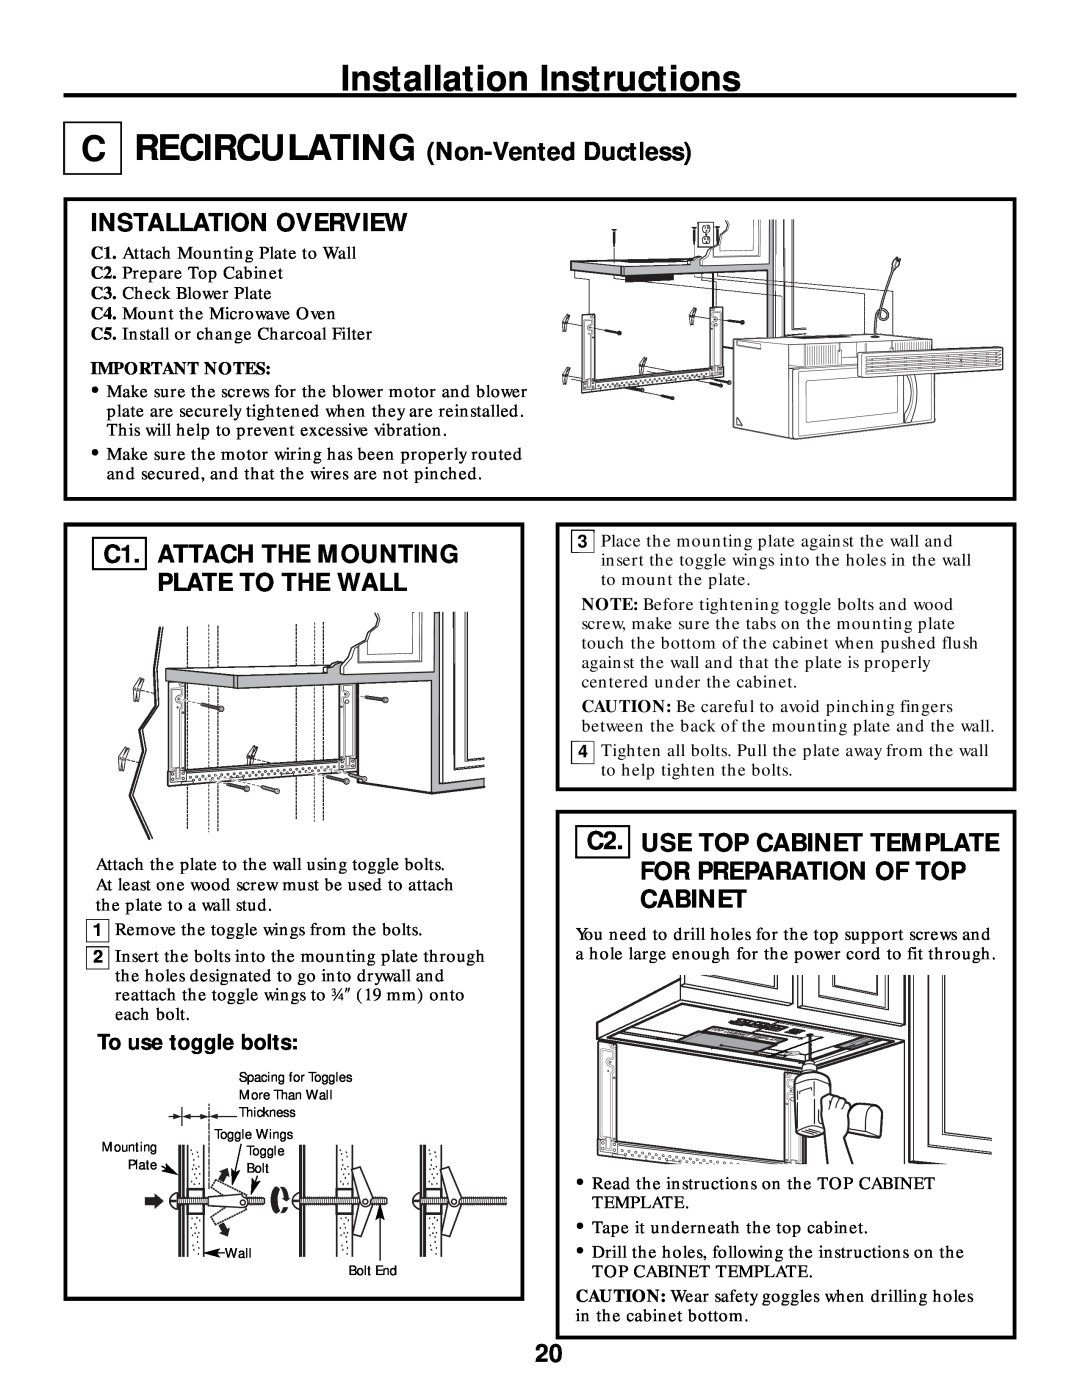 Frigidaire 316495064 RECIRCULATING Non-VentedDuctless, C1. ATTACH THE MOUNTING PLATE TO THE WALL, Installation Overview 